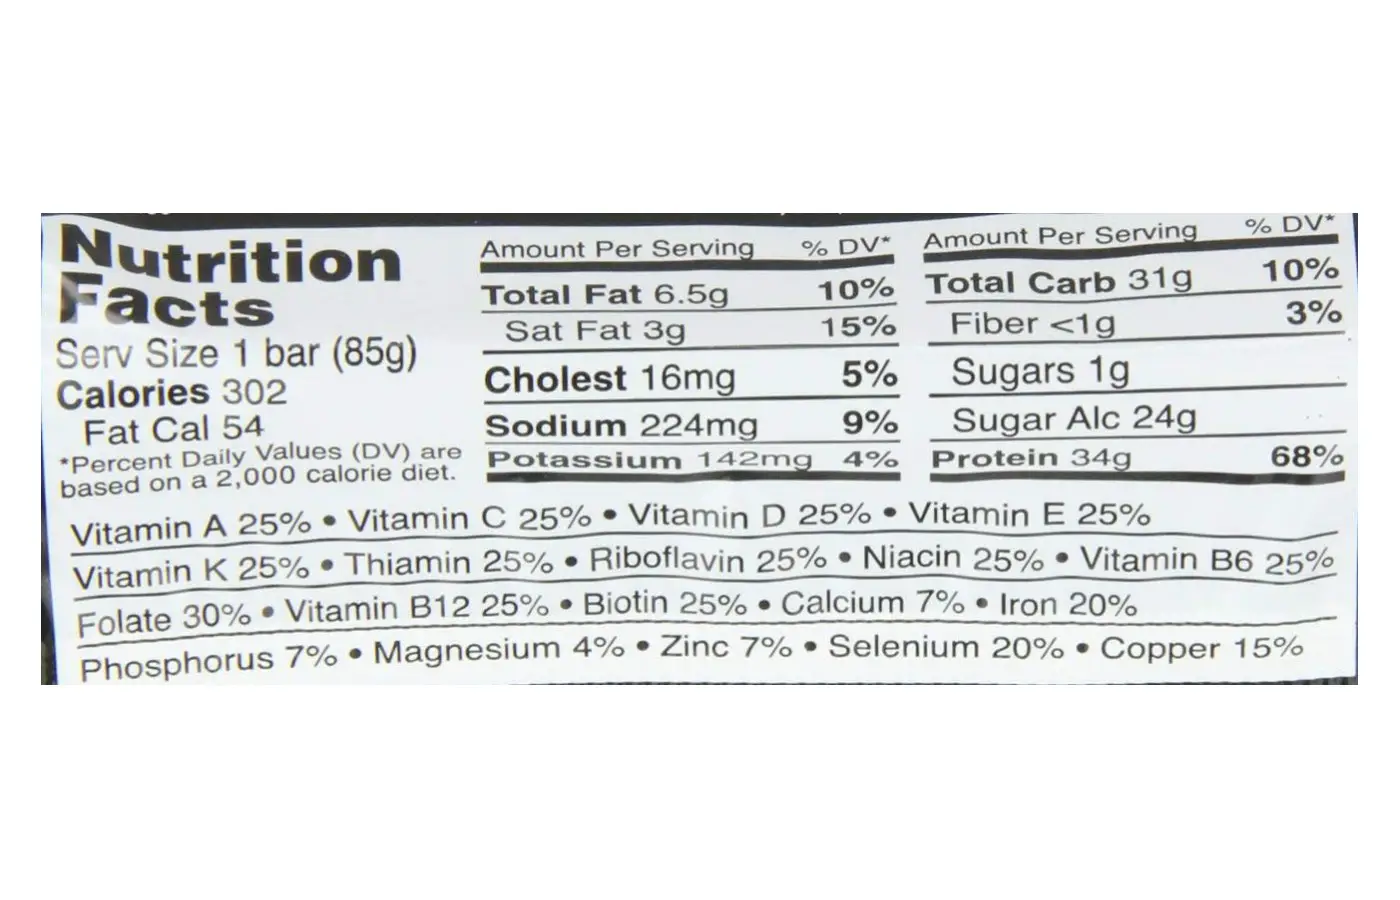 Universal Nutrition Facts